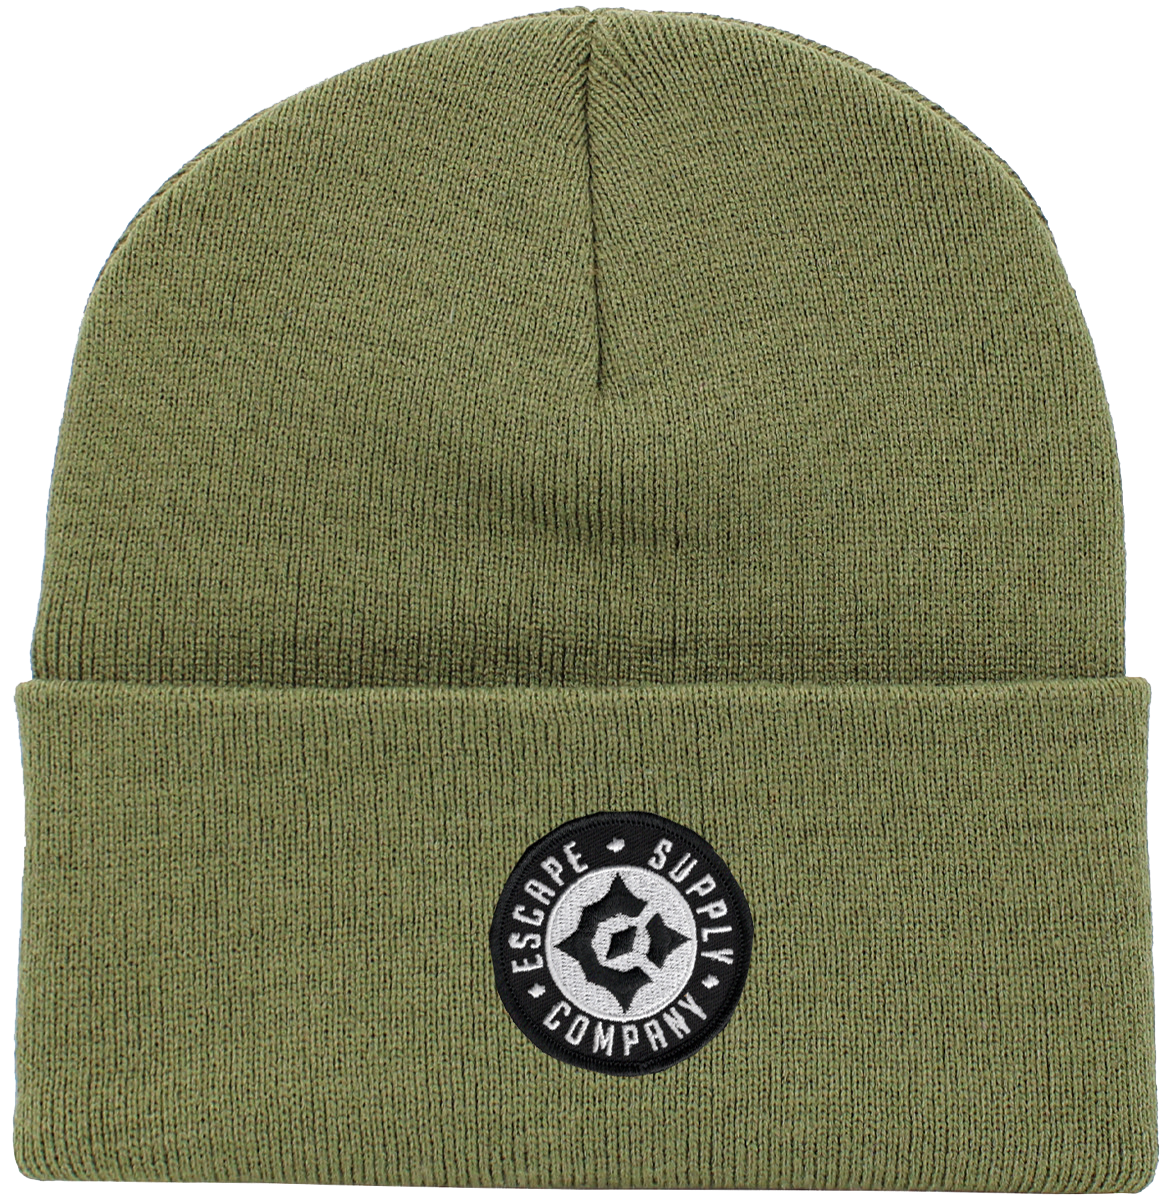 Beanie Cap with Compass